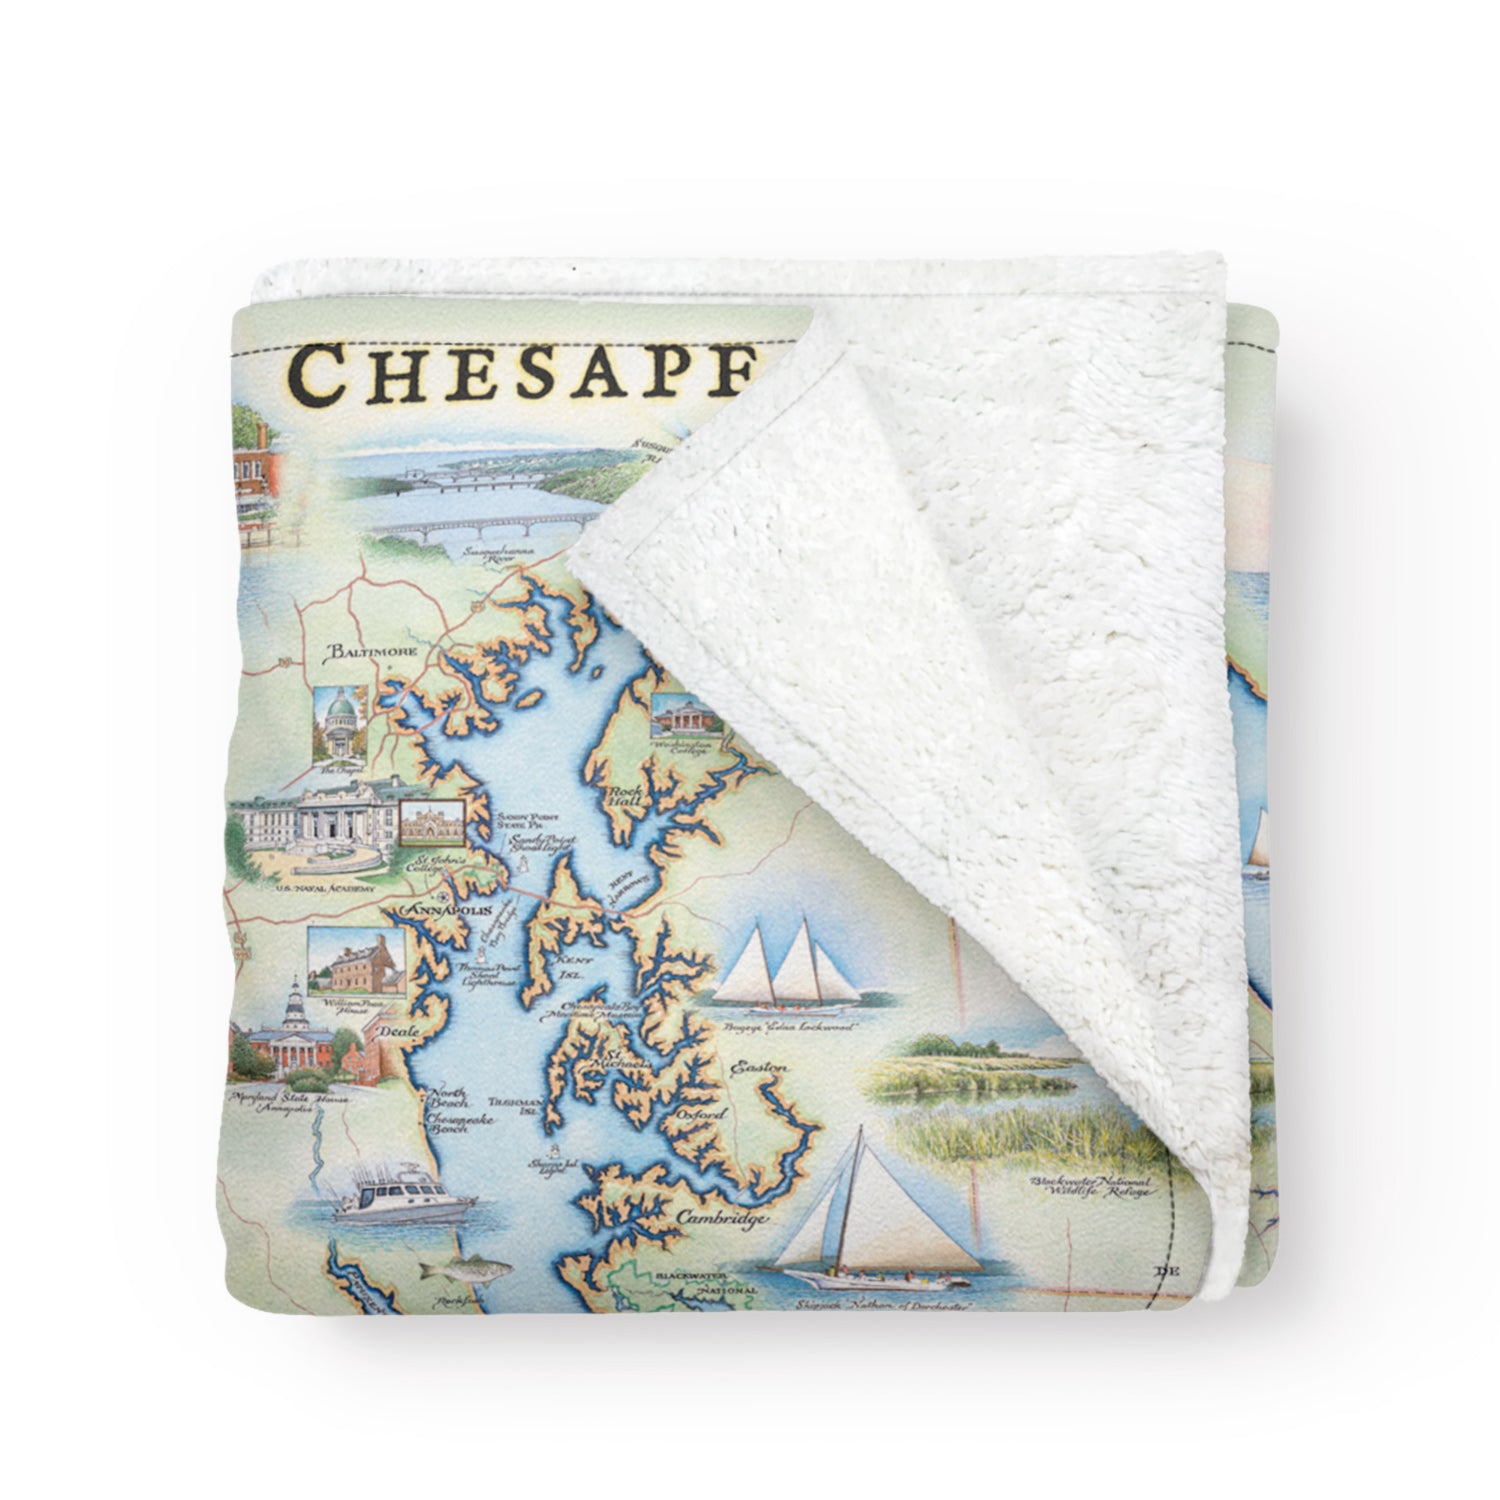 Chesapeake Bay Map fleece blanket in earth tone colors blue and green. The map features blue crab and sail boats. Measures 58